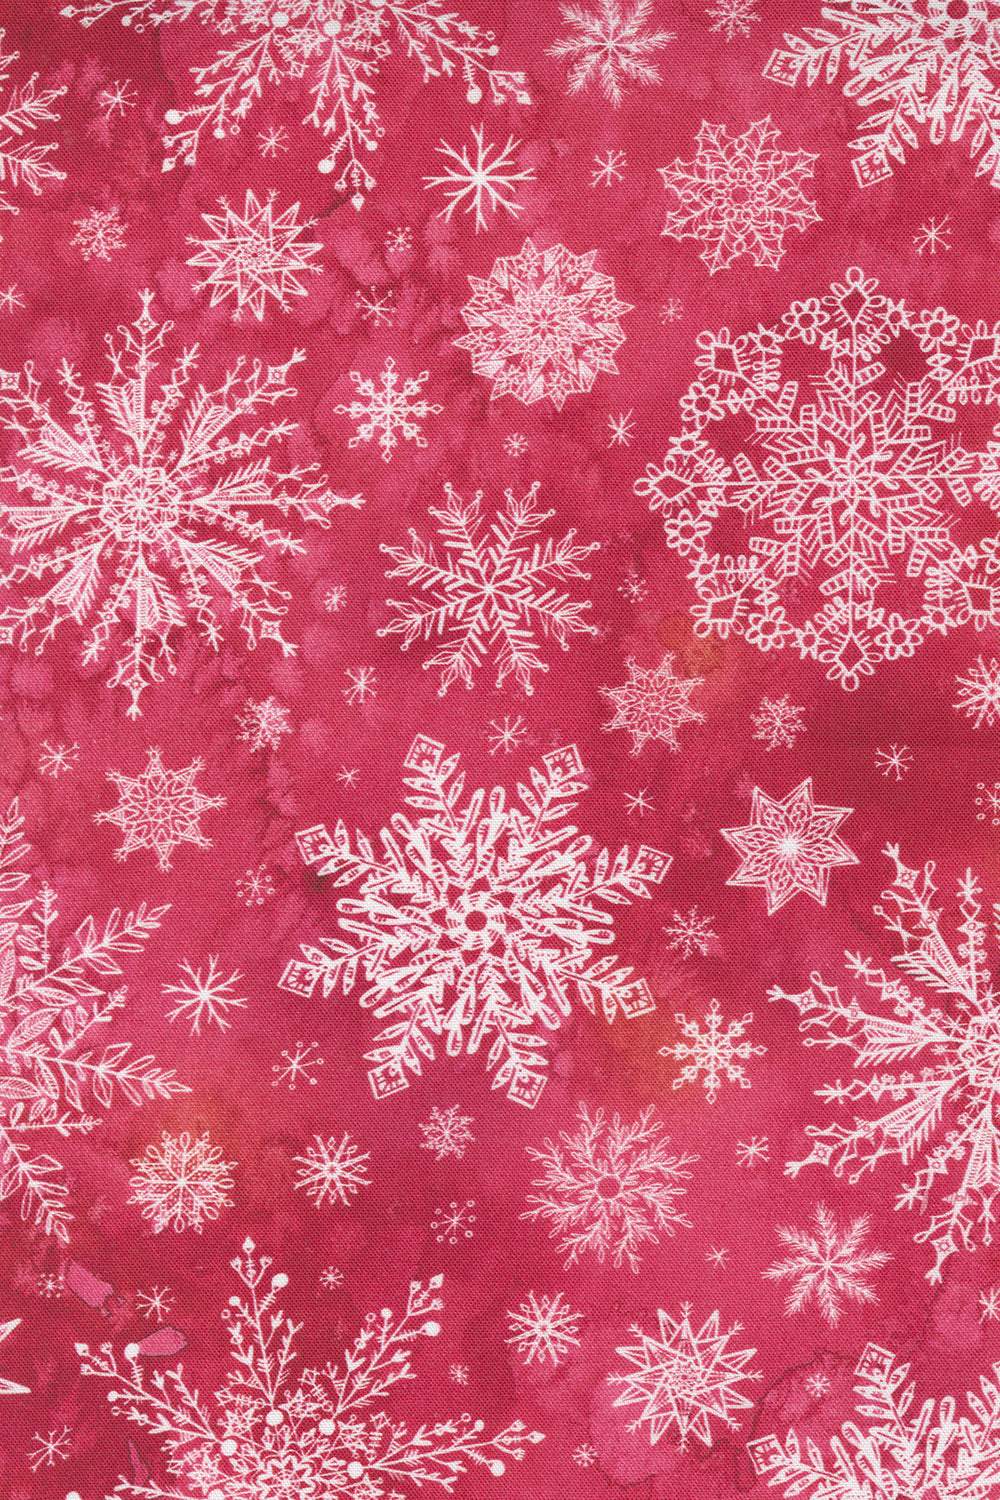 Starflower Christmas Snowflakes By Create Joy Project For Moda Red